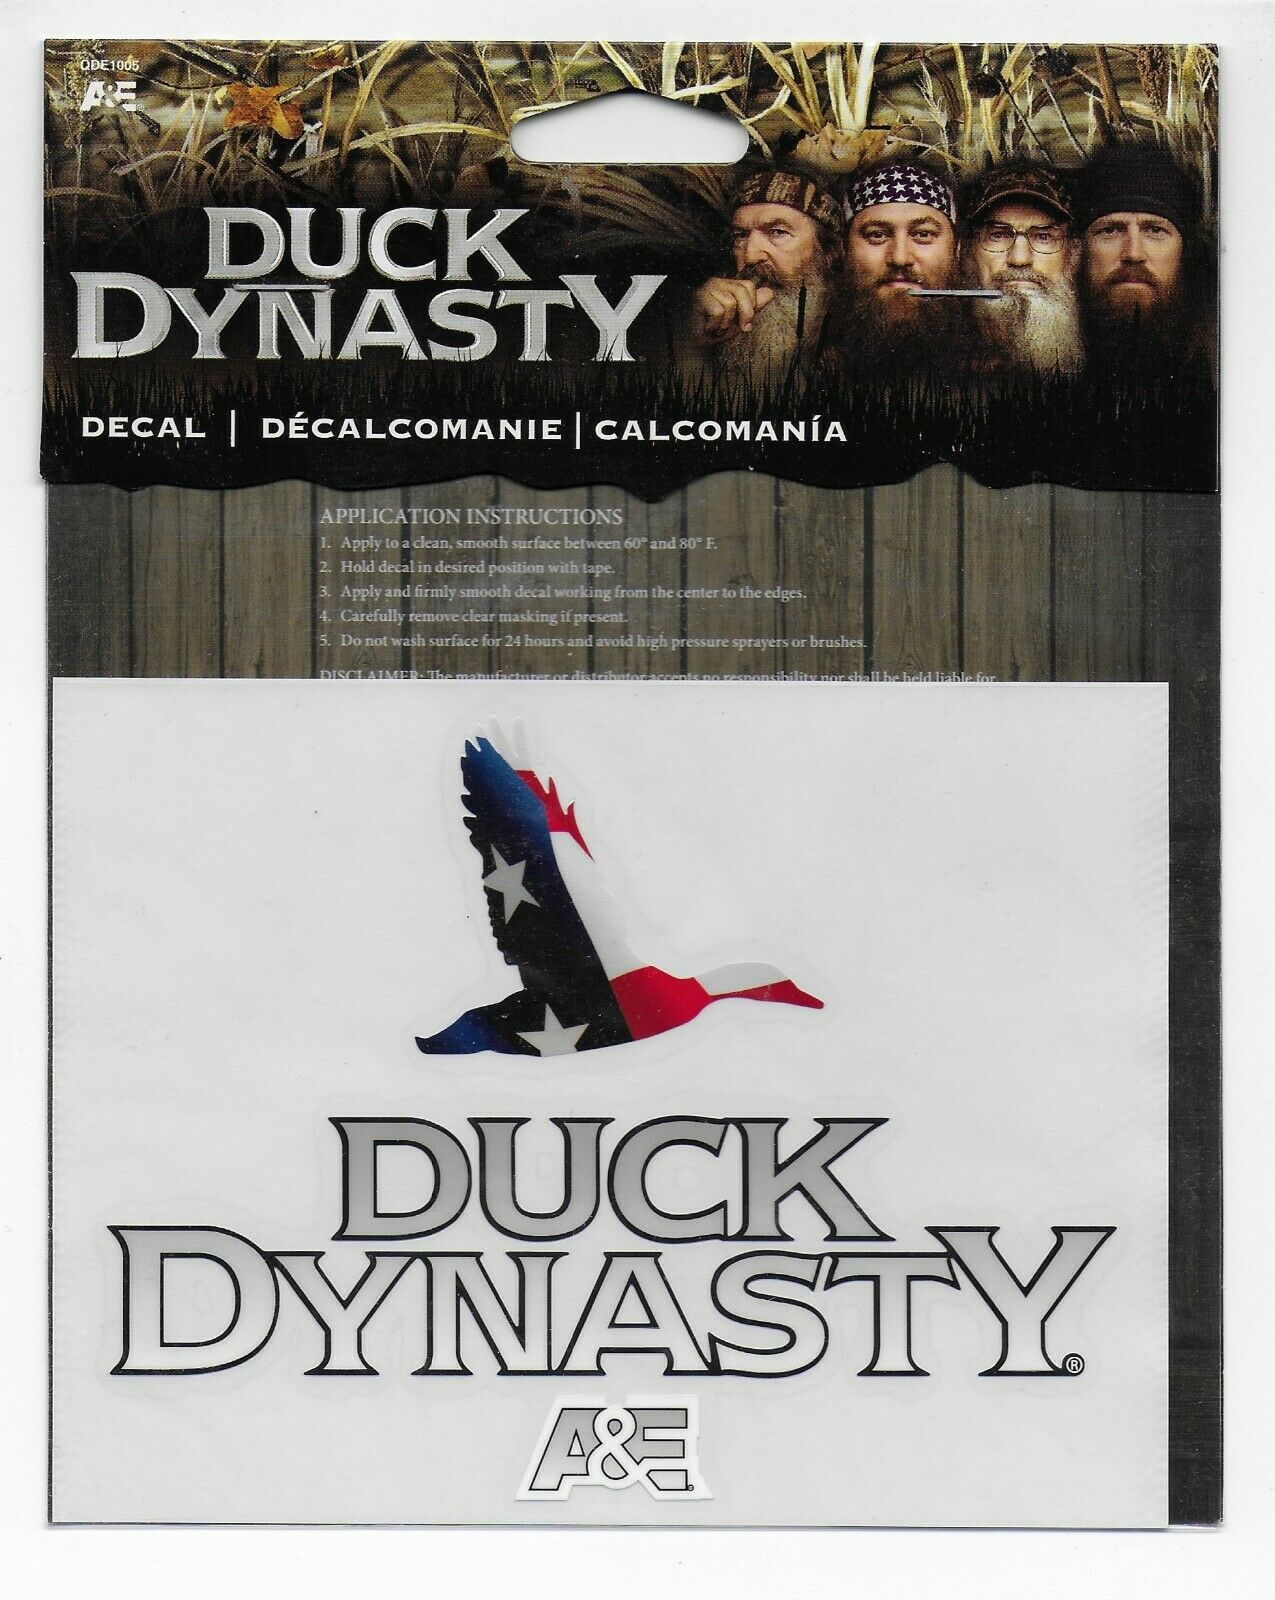 Duck Dynasty Vehicle Window Decal New Uncle Si Phil Willie Jace A&e Tv Show